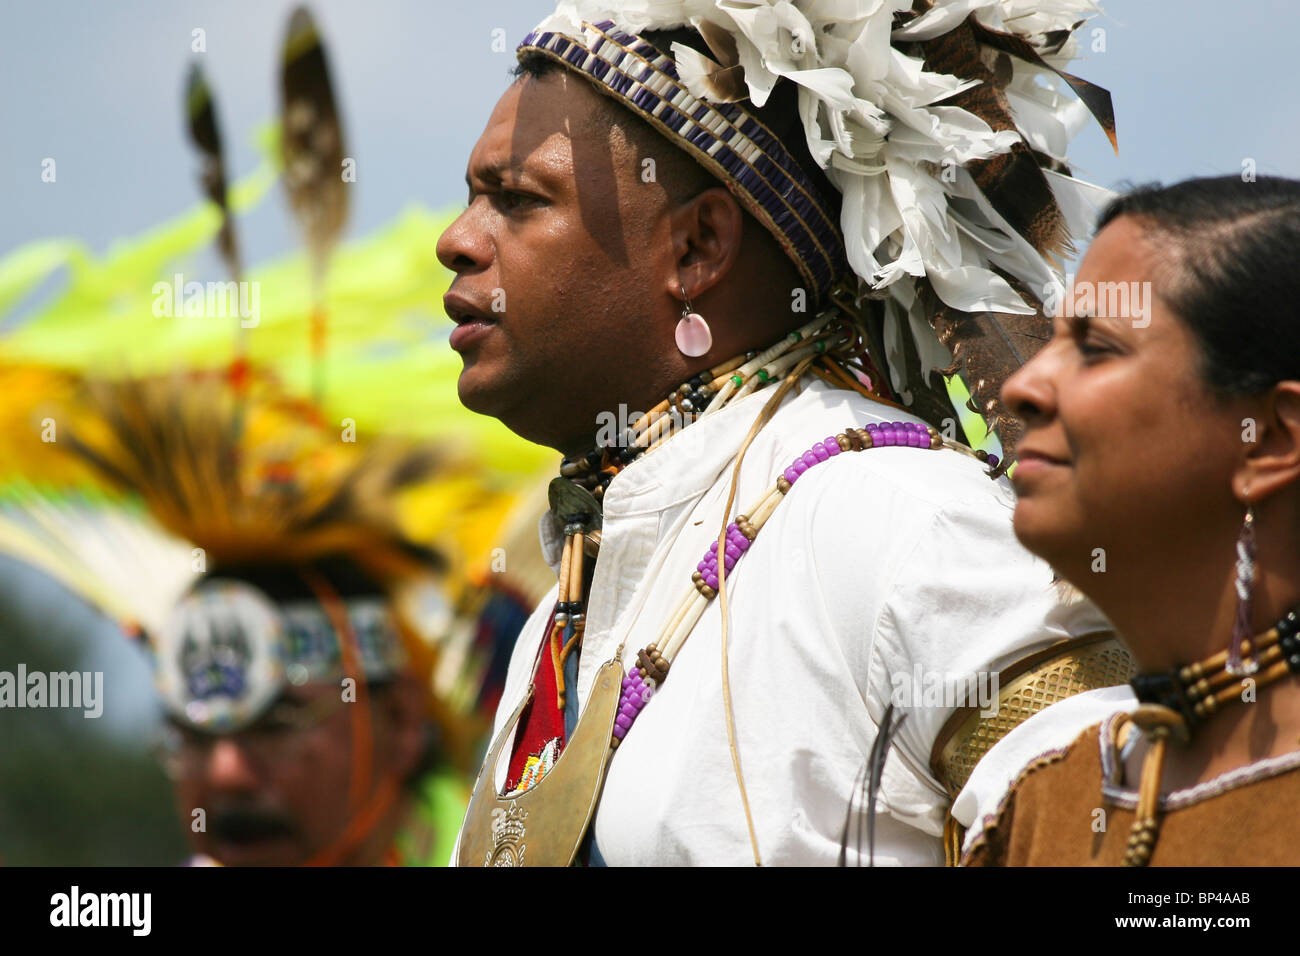 Native Americans in full traditional regalia parade in the dance circle at the 8th Annual Red Wing PowWow in Virginia Beach Stock Photo